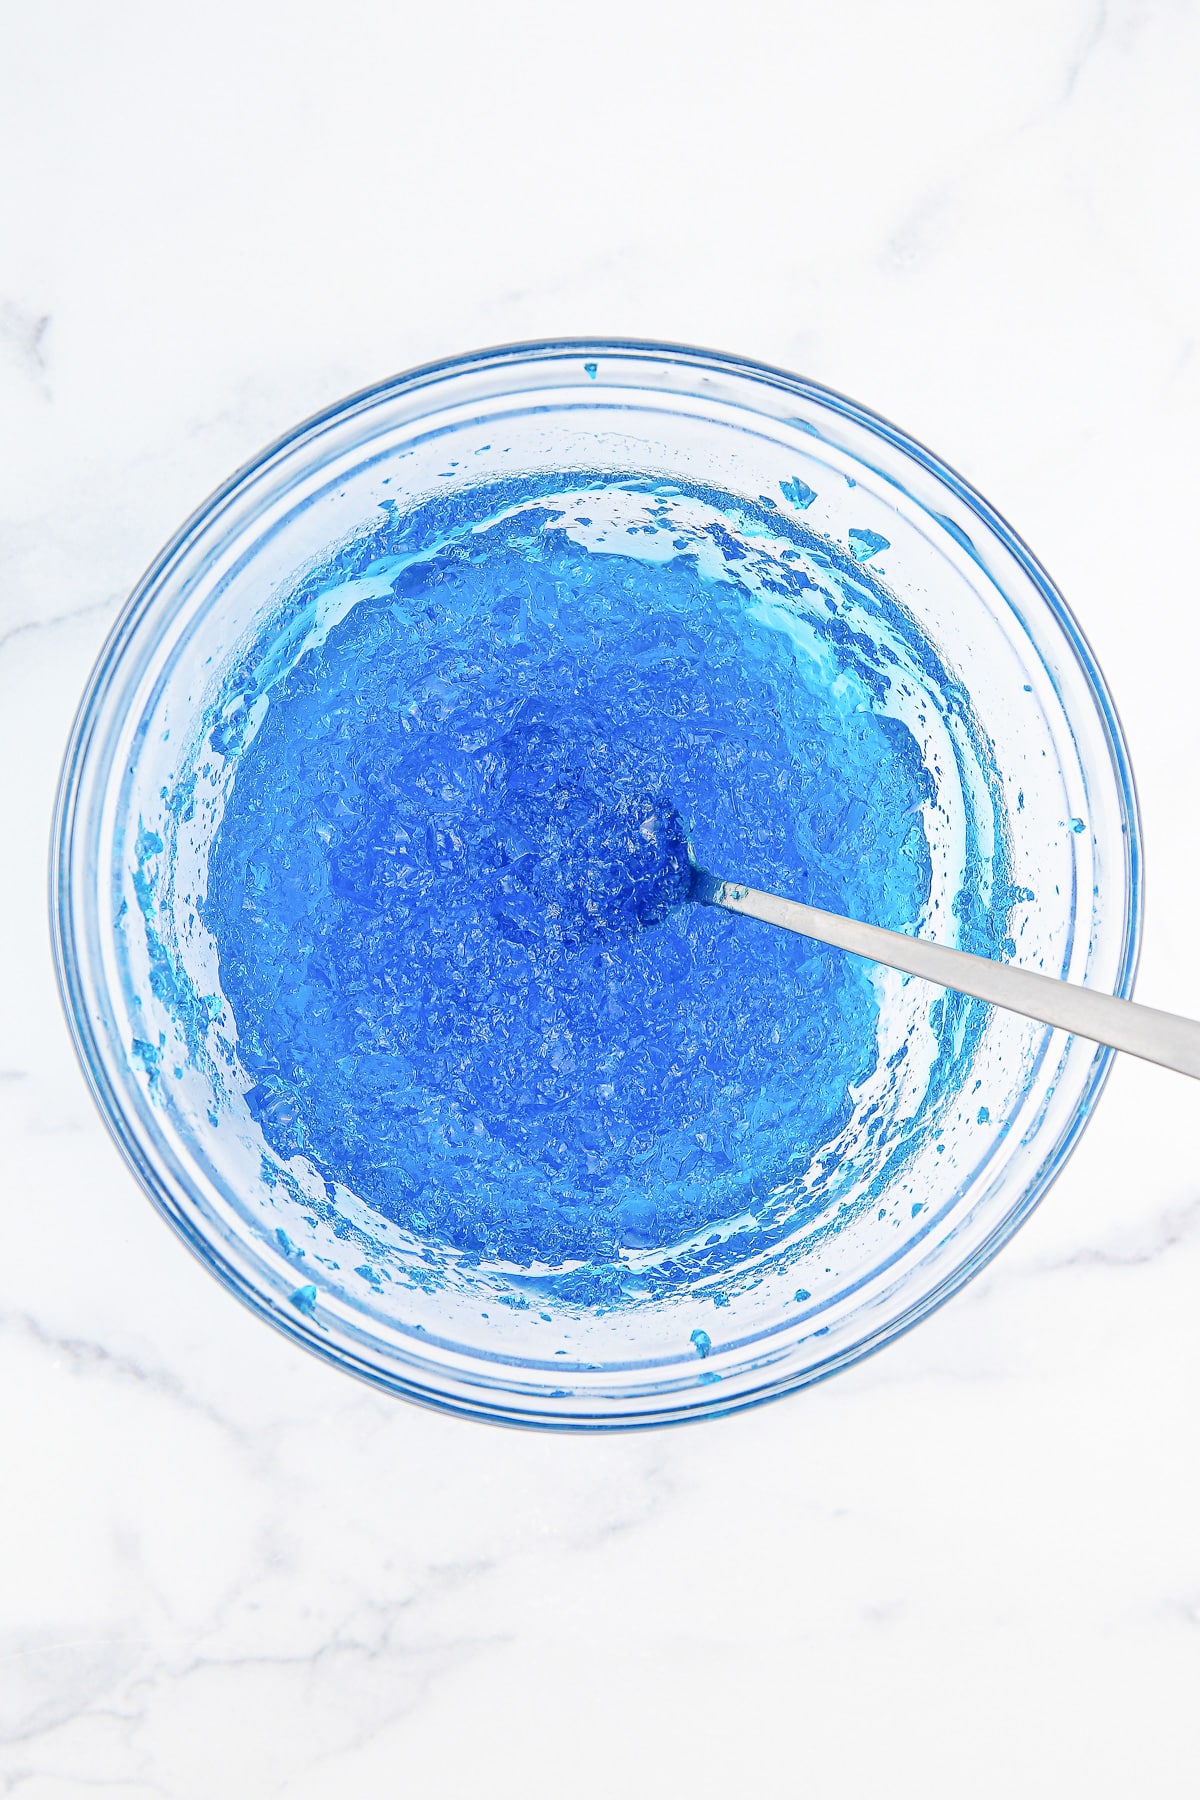 Stirring blue gelatin in a bowl from overhead to make bubbles.